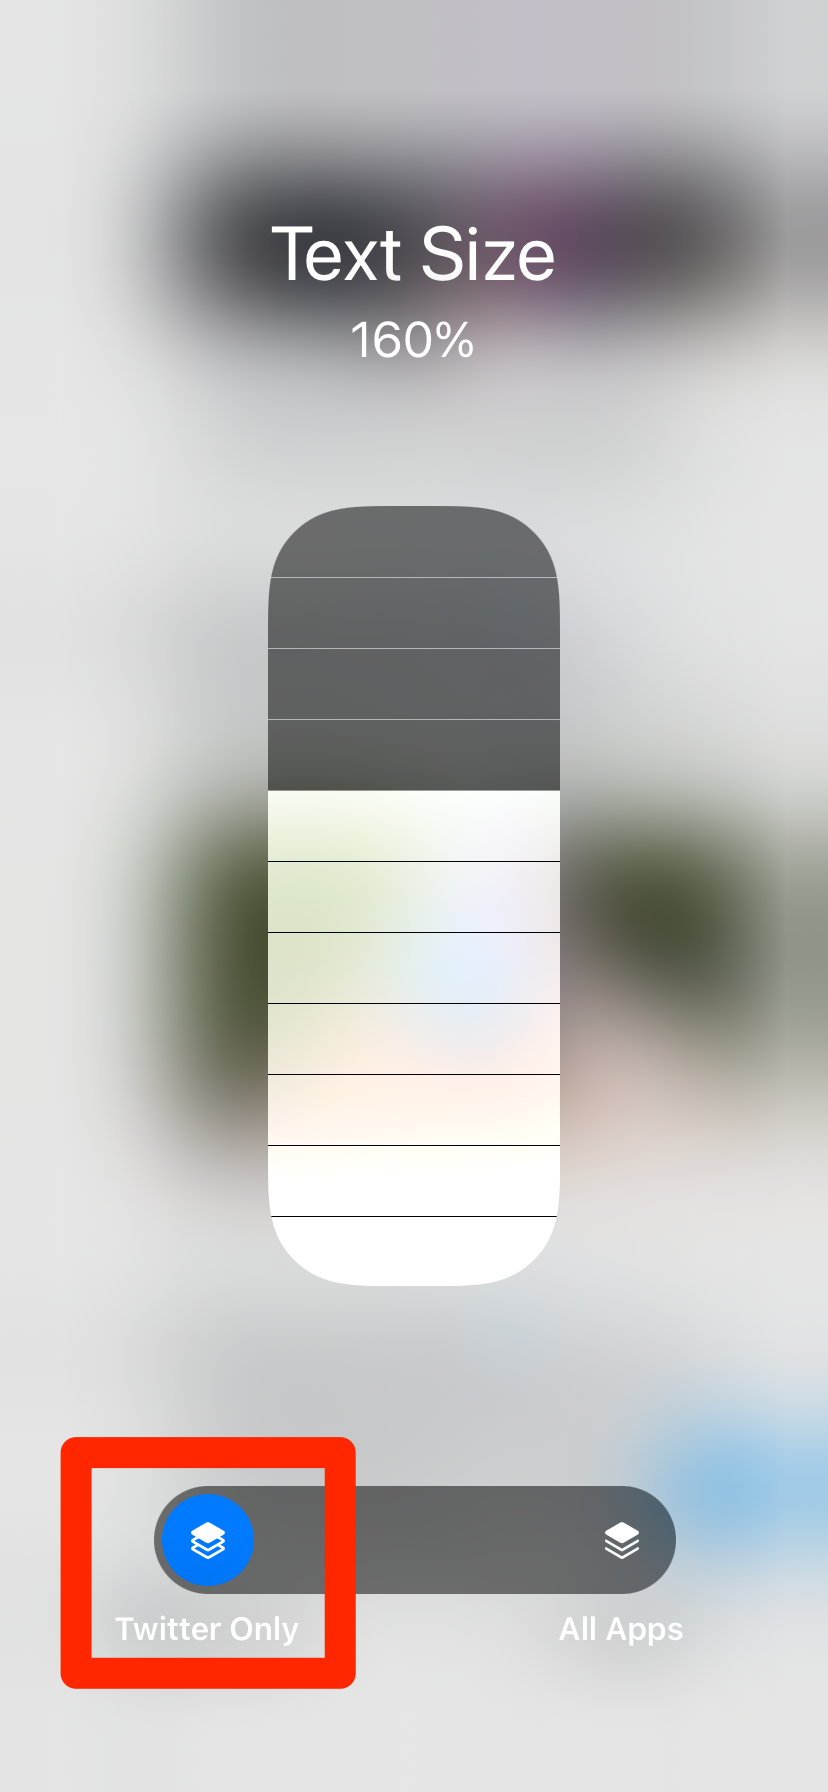 The Text Size widget on an iPhone, which lets you change the text size in specific apps.